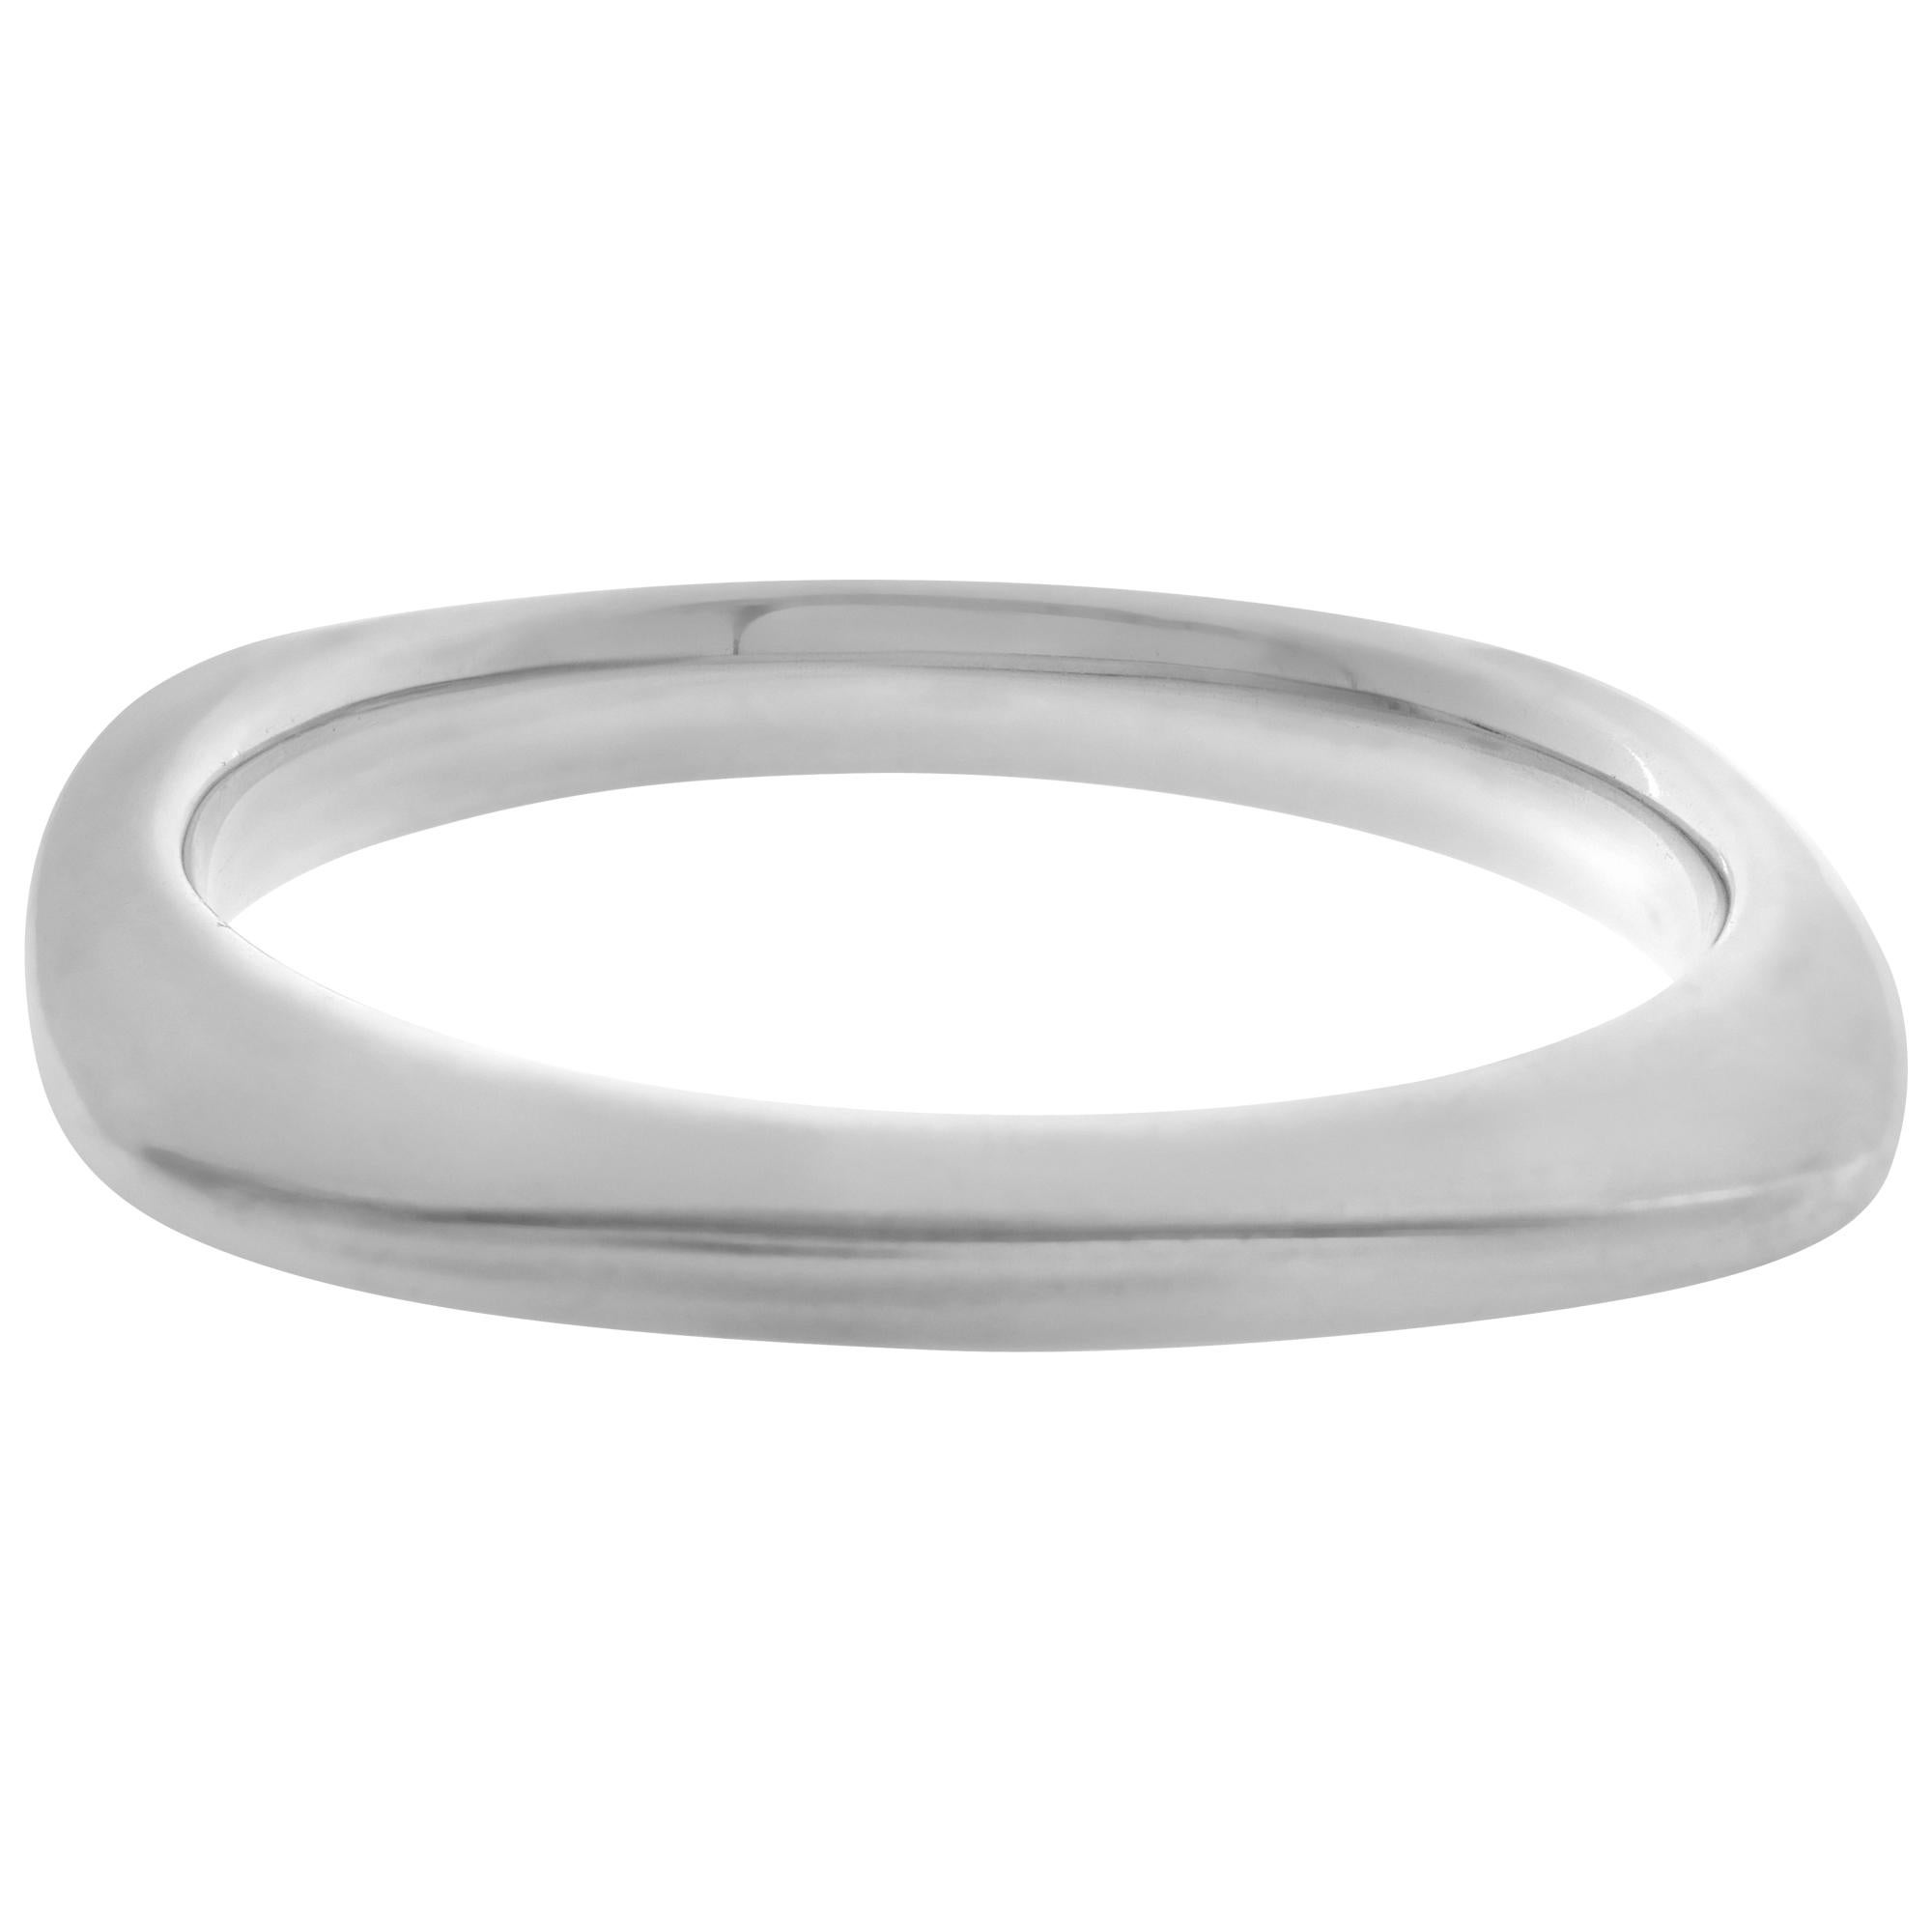 Tiffany & Co. cushion square bangle bracelet in sterling silver. The bracelet measures approximately 9mm at its widest points and rises approx. 7mm to 12mm from the hand, fits 6-7 inches wrist.